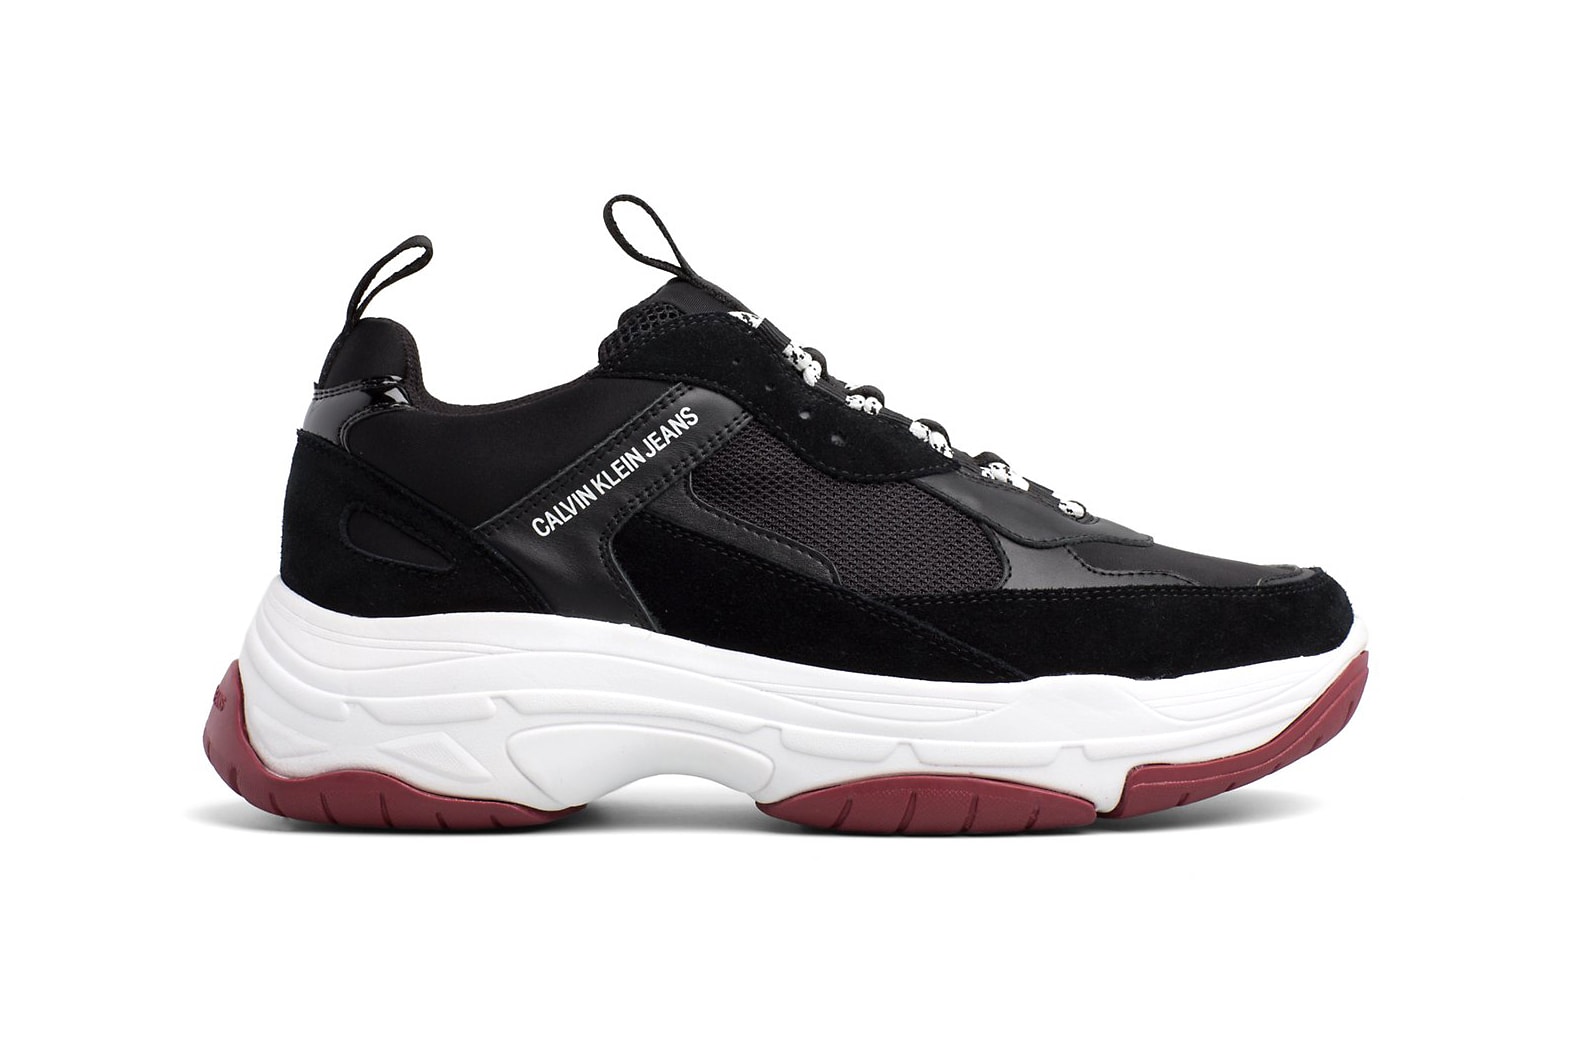 calvin klein jeans marvin chunky runner sneaker dad shoe white black tan beige suede leather 139 usd drop release available sell sale purchase buy cop raf simons